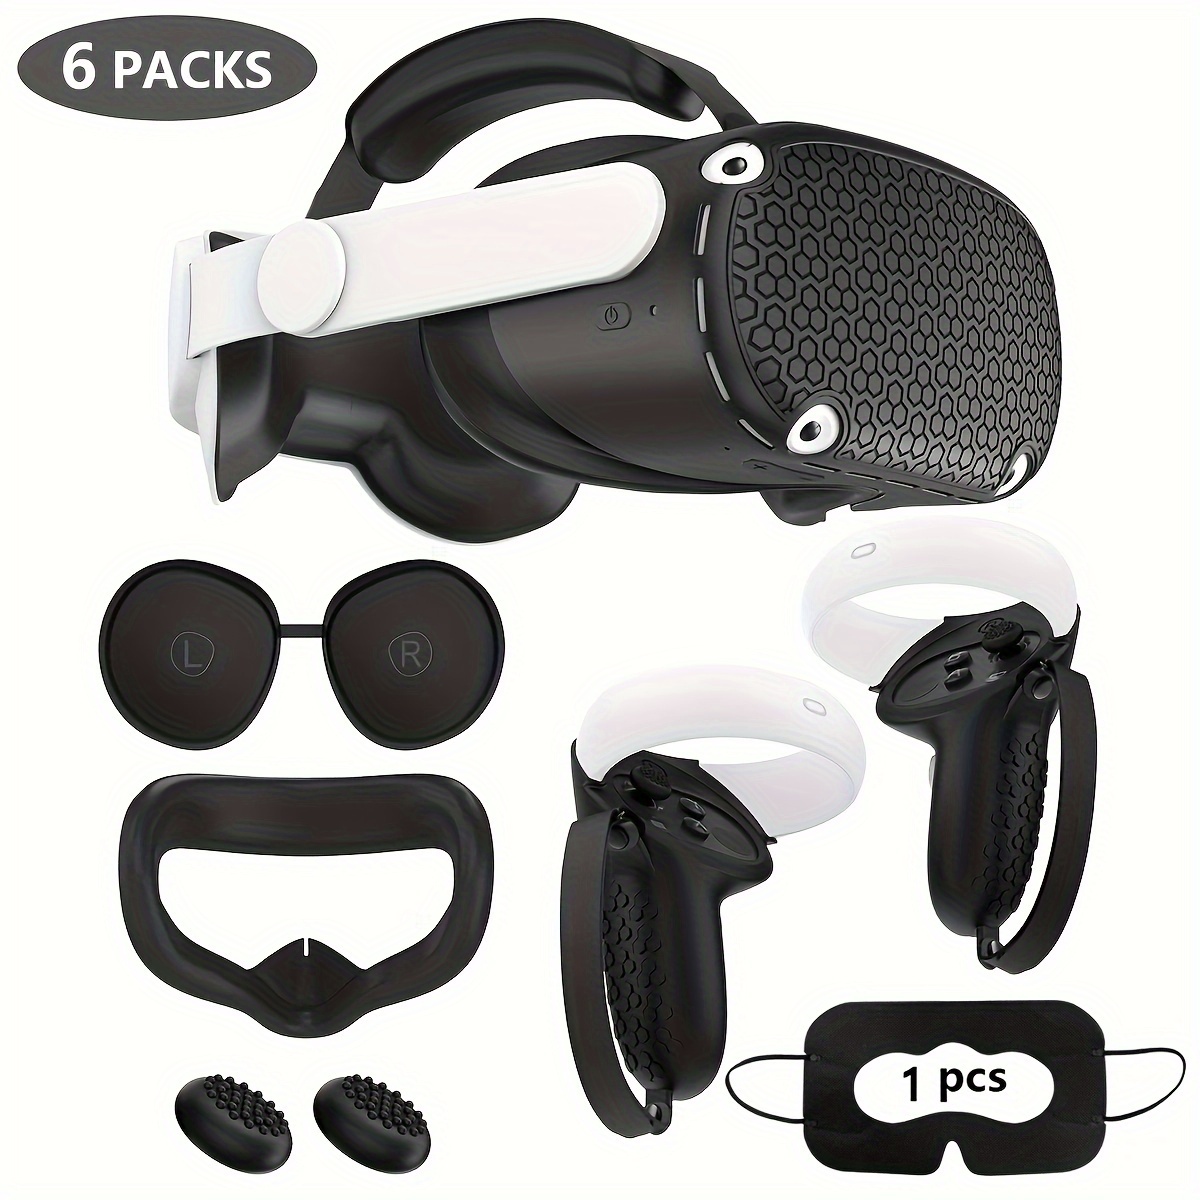 6 Packs For Oculus/Meta Quest 2 Accessories Set, For Quest 2 VR Silicone  Face Cover, VR Shell Cover, for Quest 2 Touch Controller Grip Cover,  Protective Lens Cover, Anti-slip Joystick Caps And Disposab